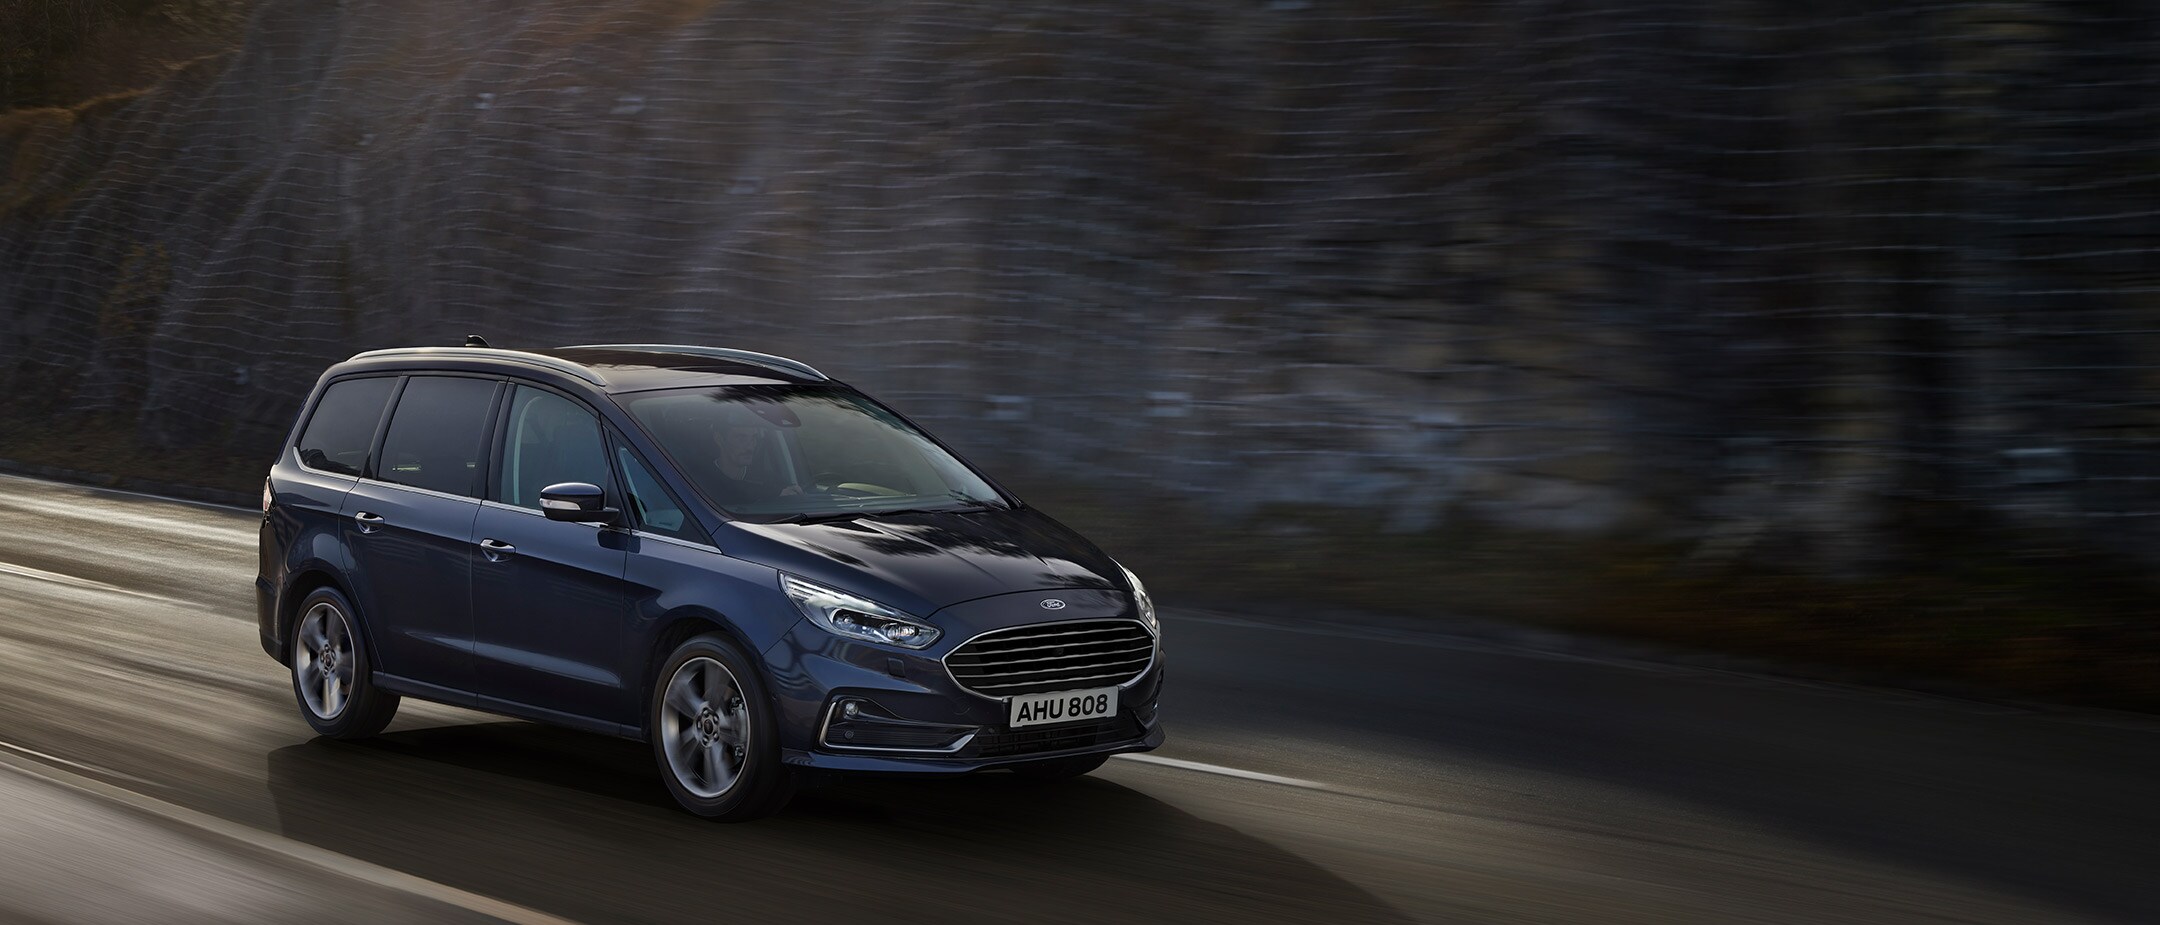 Ford Galaxy Titanium driving around the bend in city